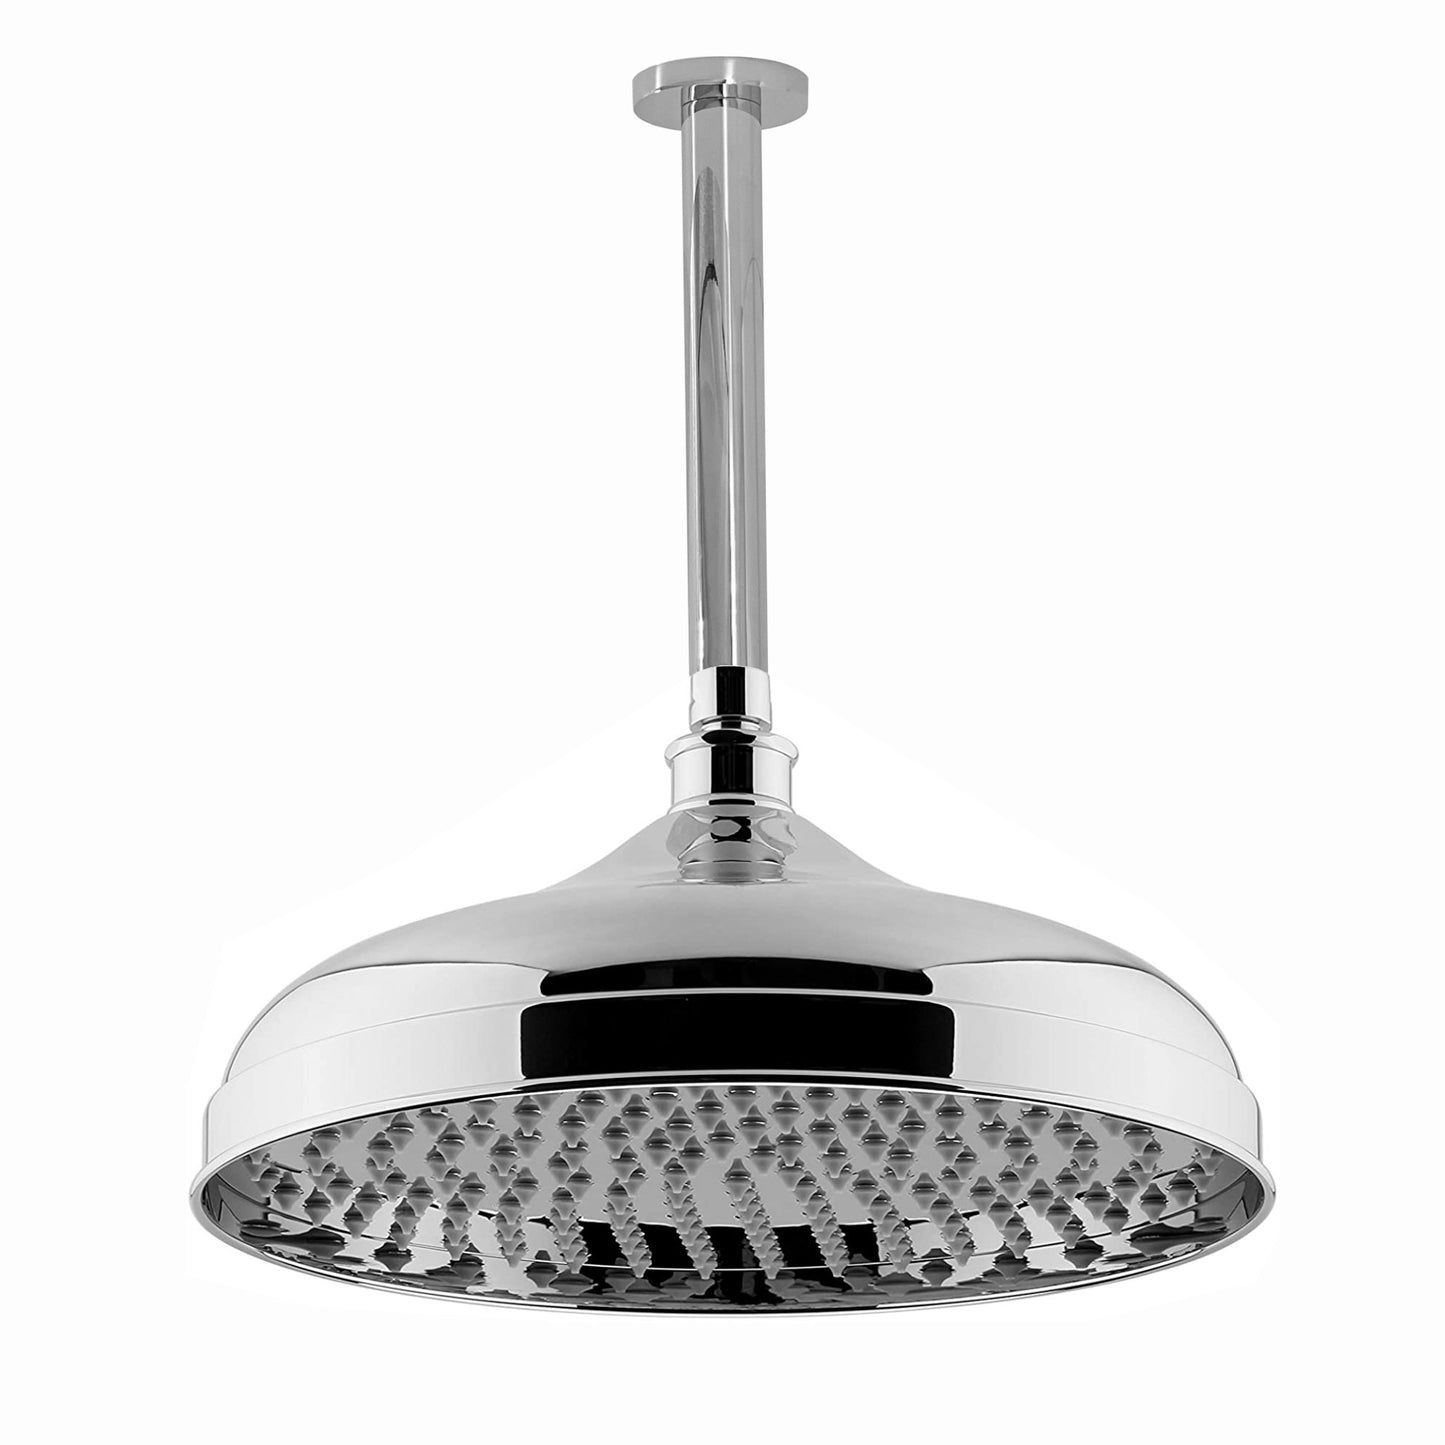 Traditional Ceiling Fixed Apron Brass Shower Head 12" With 180mm Ceiling Shower Arm - Chrome